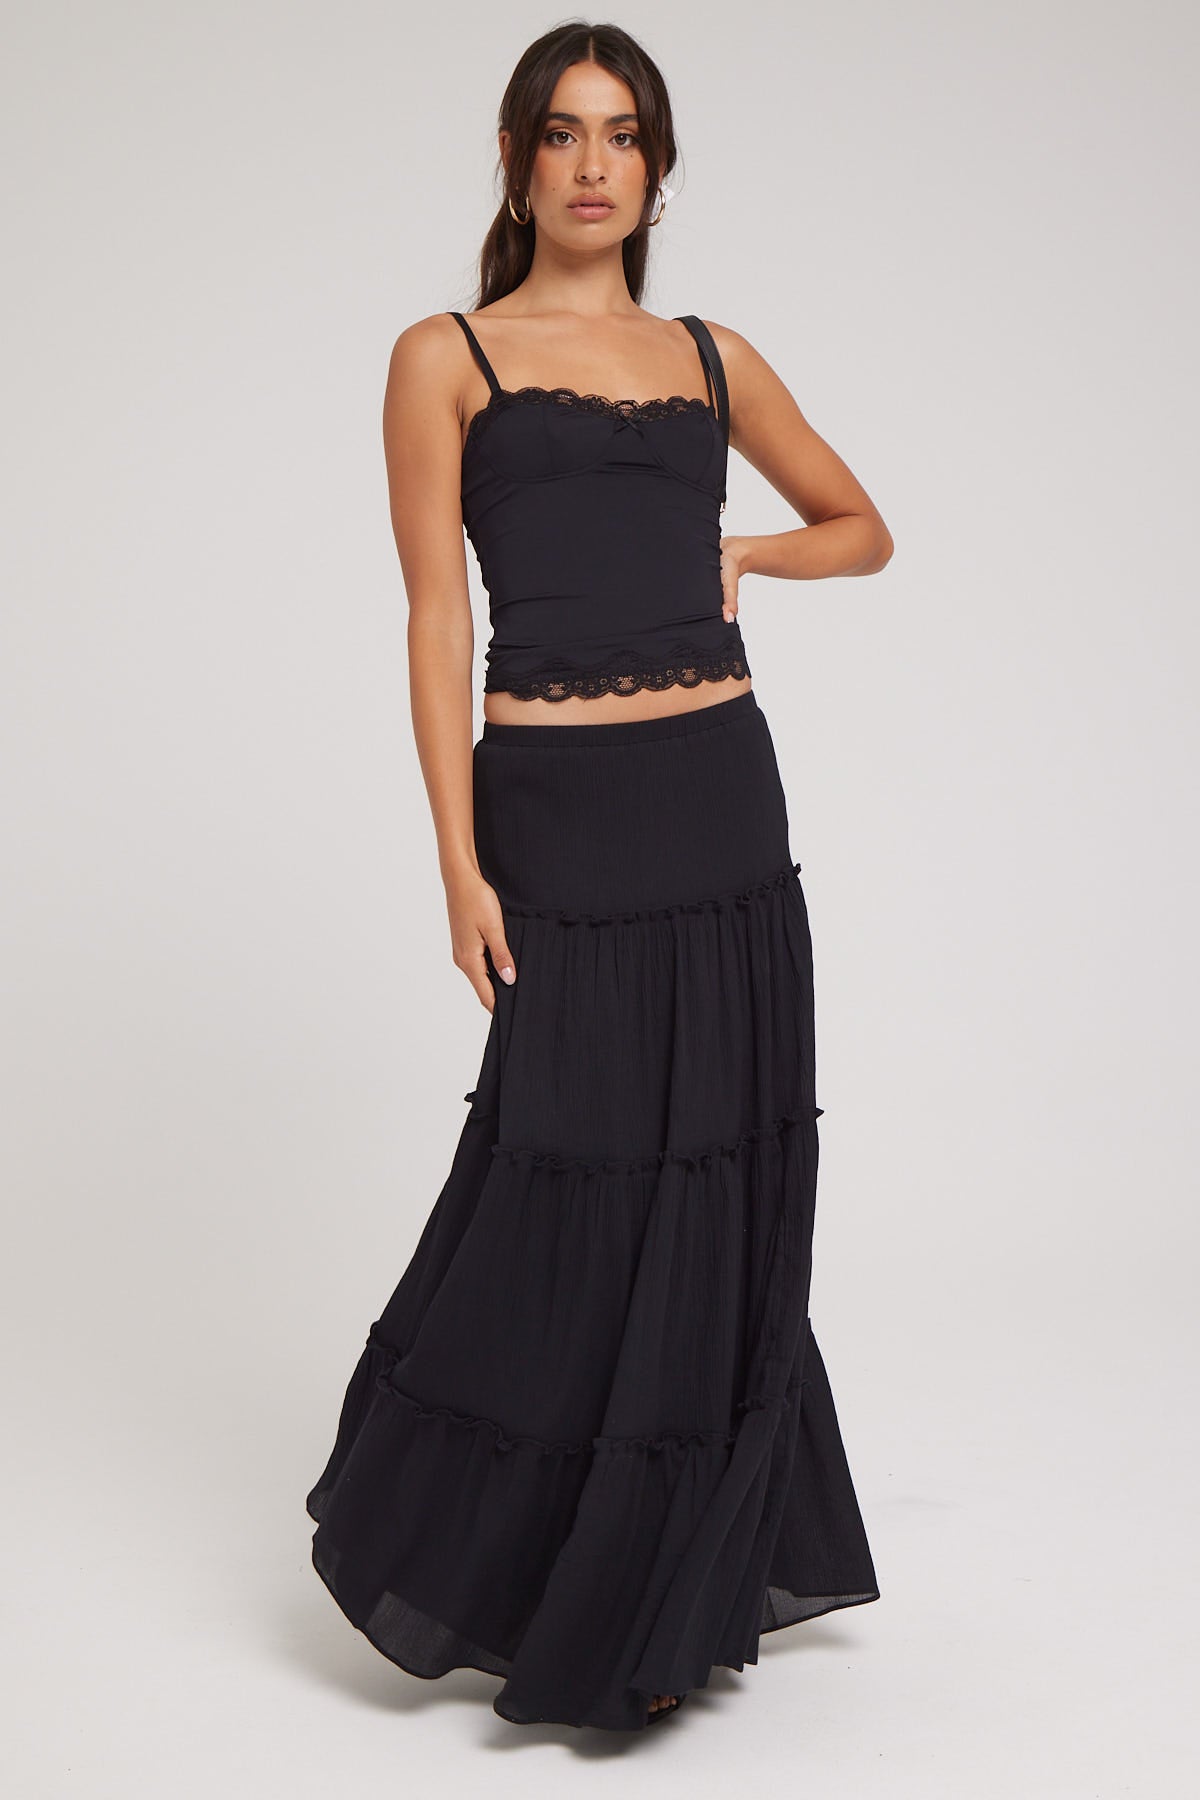 Luck & Trouble Summer Tiered Maxi Skirt Black